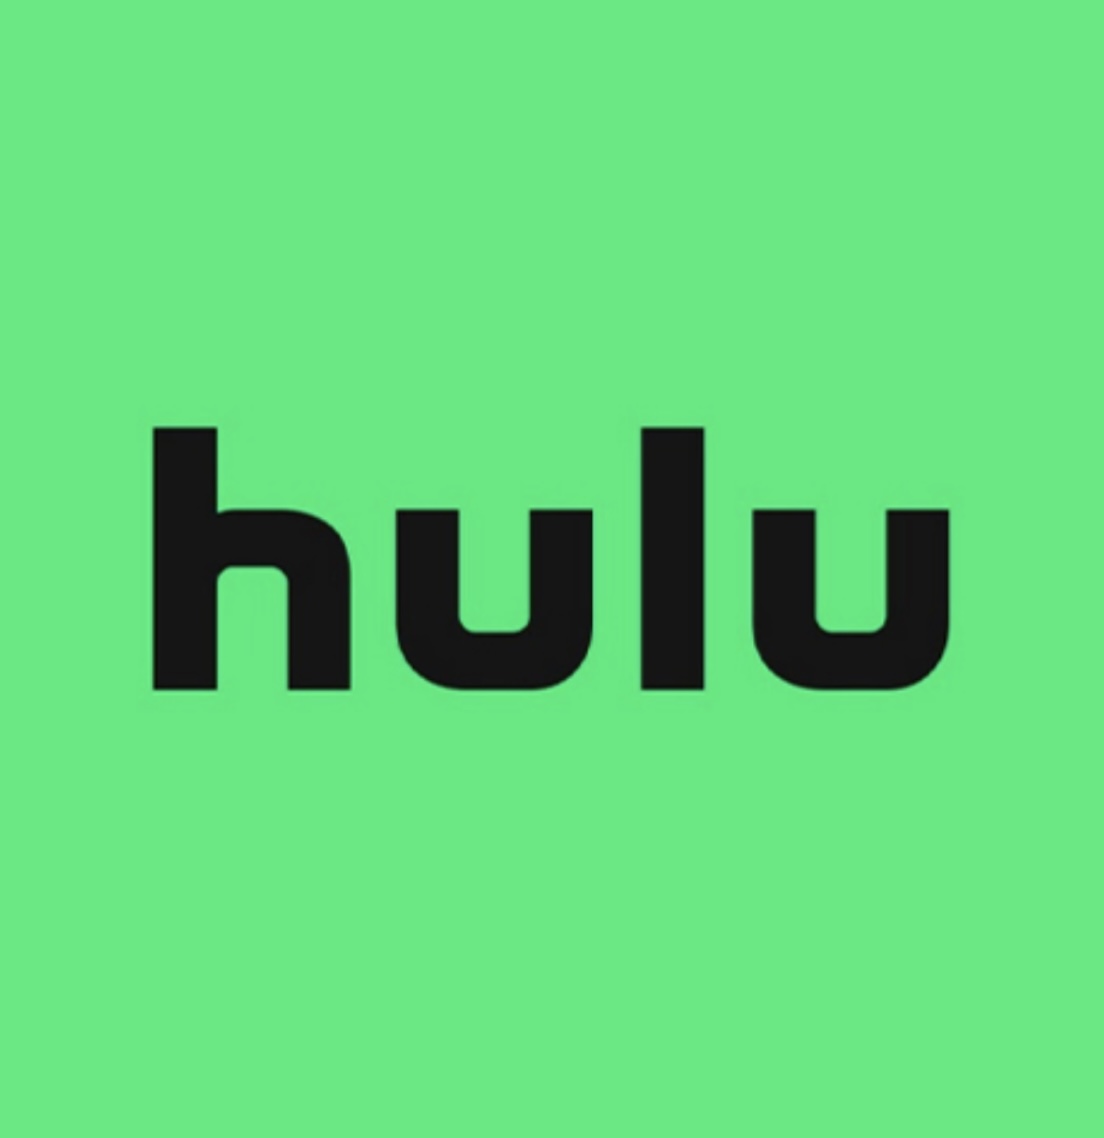 The+Hulu+logo+can+be+seen+which+is+where+all+of+the+mentioned+shows+can+be+found.